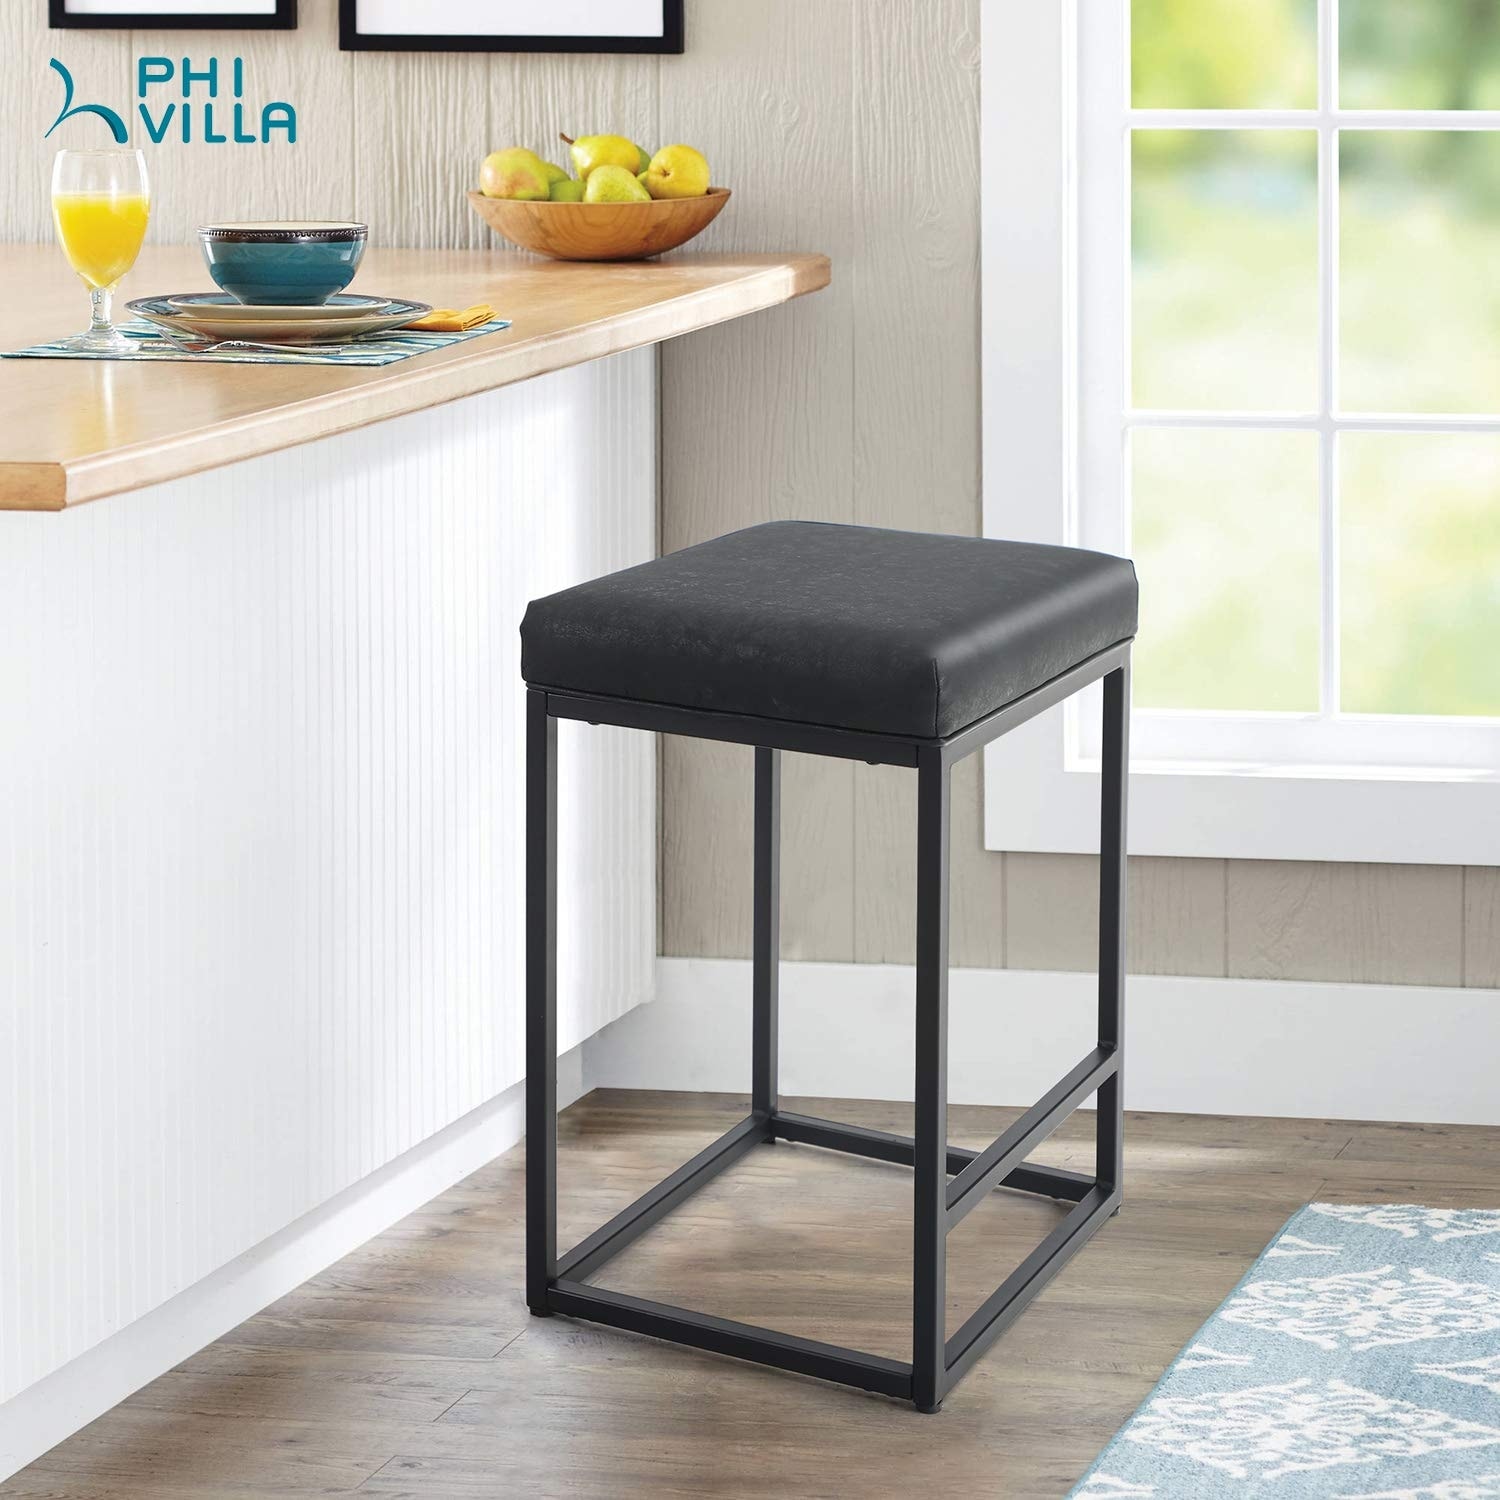 PHI VILLA Bar Stools Counter Height,24 Inches Square Leather Bar Stools Without Back for Kitchen Island,Dining Room and Living Room,Modern Designed Bar Stools Furniture Decorates Every Room,Gray